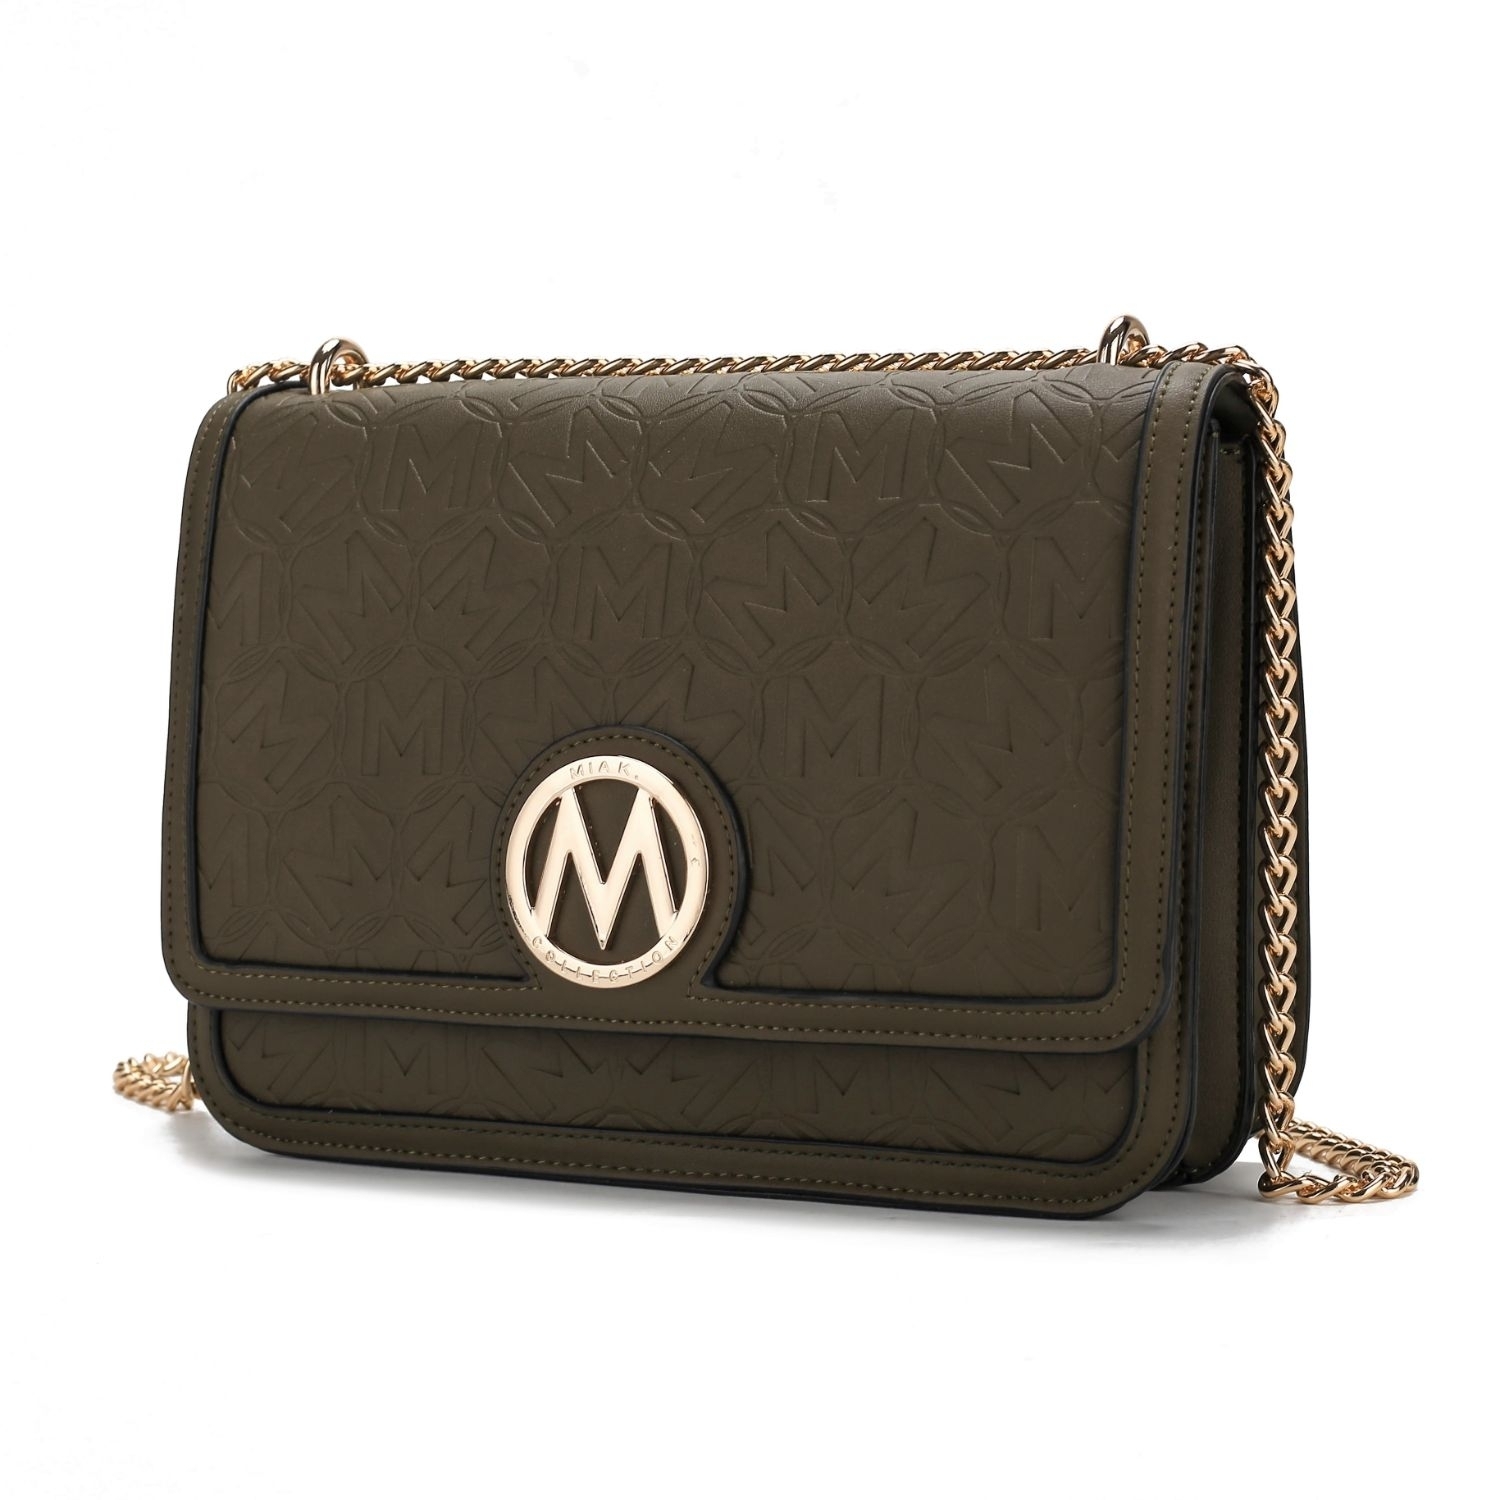 MKF Collection Amiyah Vegan Leather Women's Shoulder Bag By Mia K - Olive